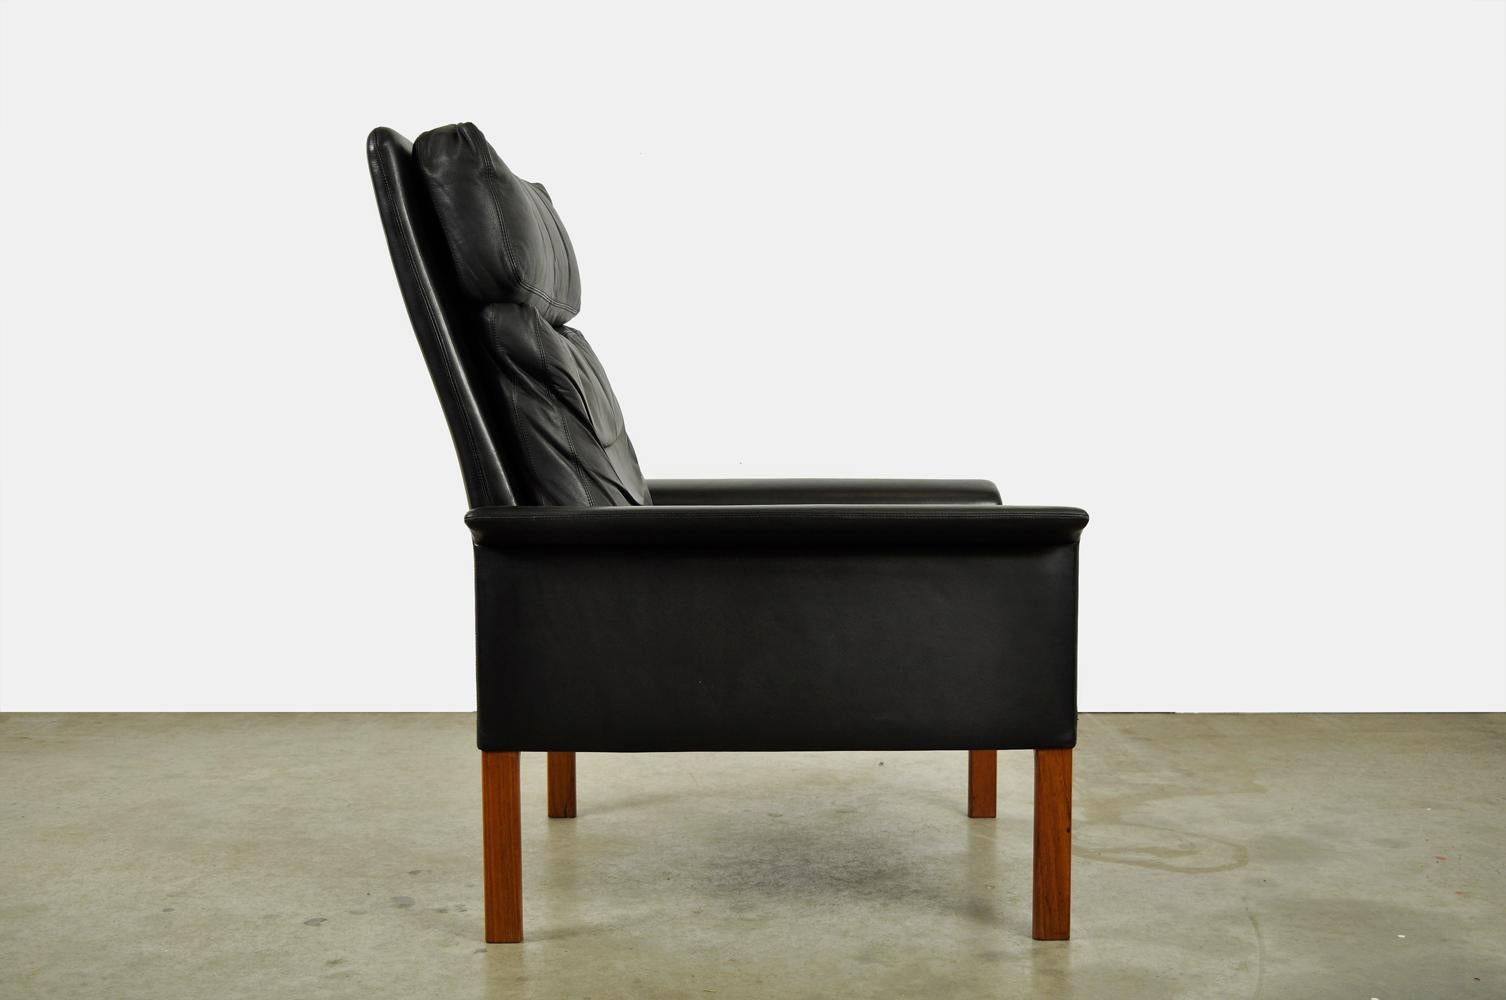 Classic vintage armchair (high model) designed by Hans Olsen and produced by CS Møbler Glostrup, 1960s. Beautiful black leather men’s armchair standing on square teak wooden legs. The armchair has a loose leather back, head and seat cushion, where